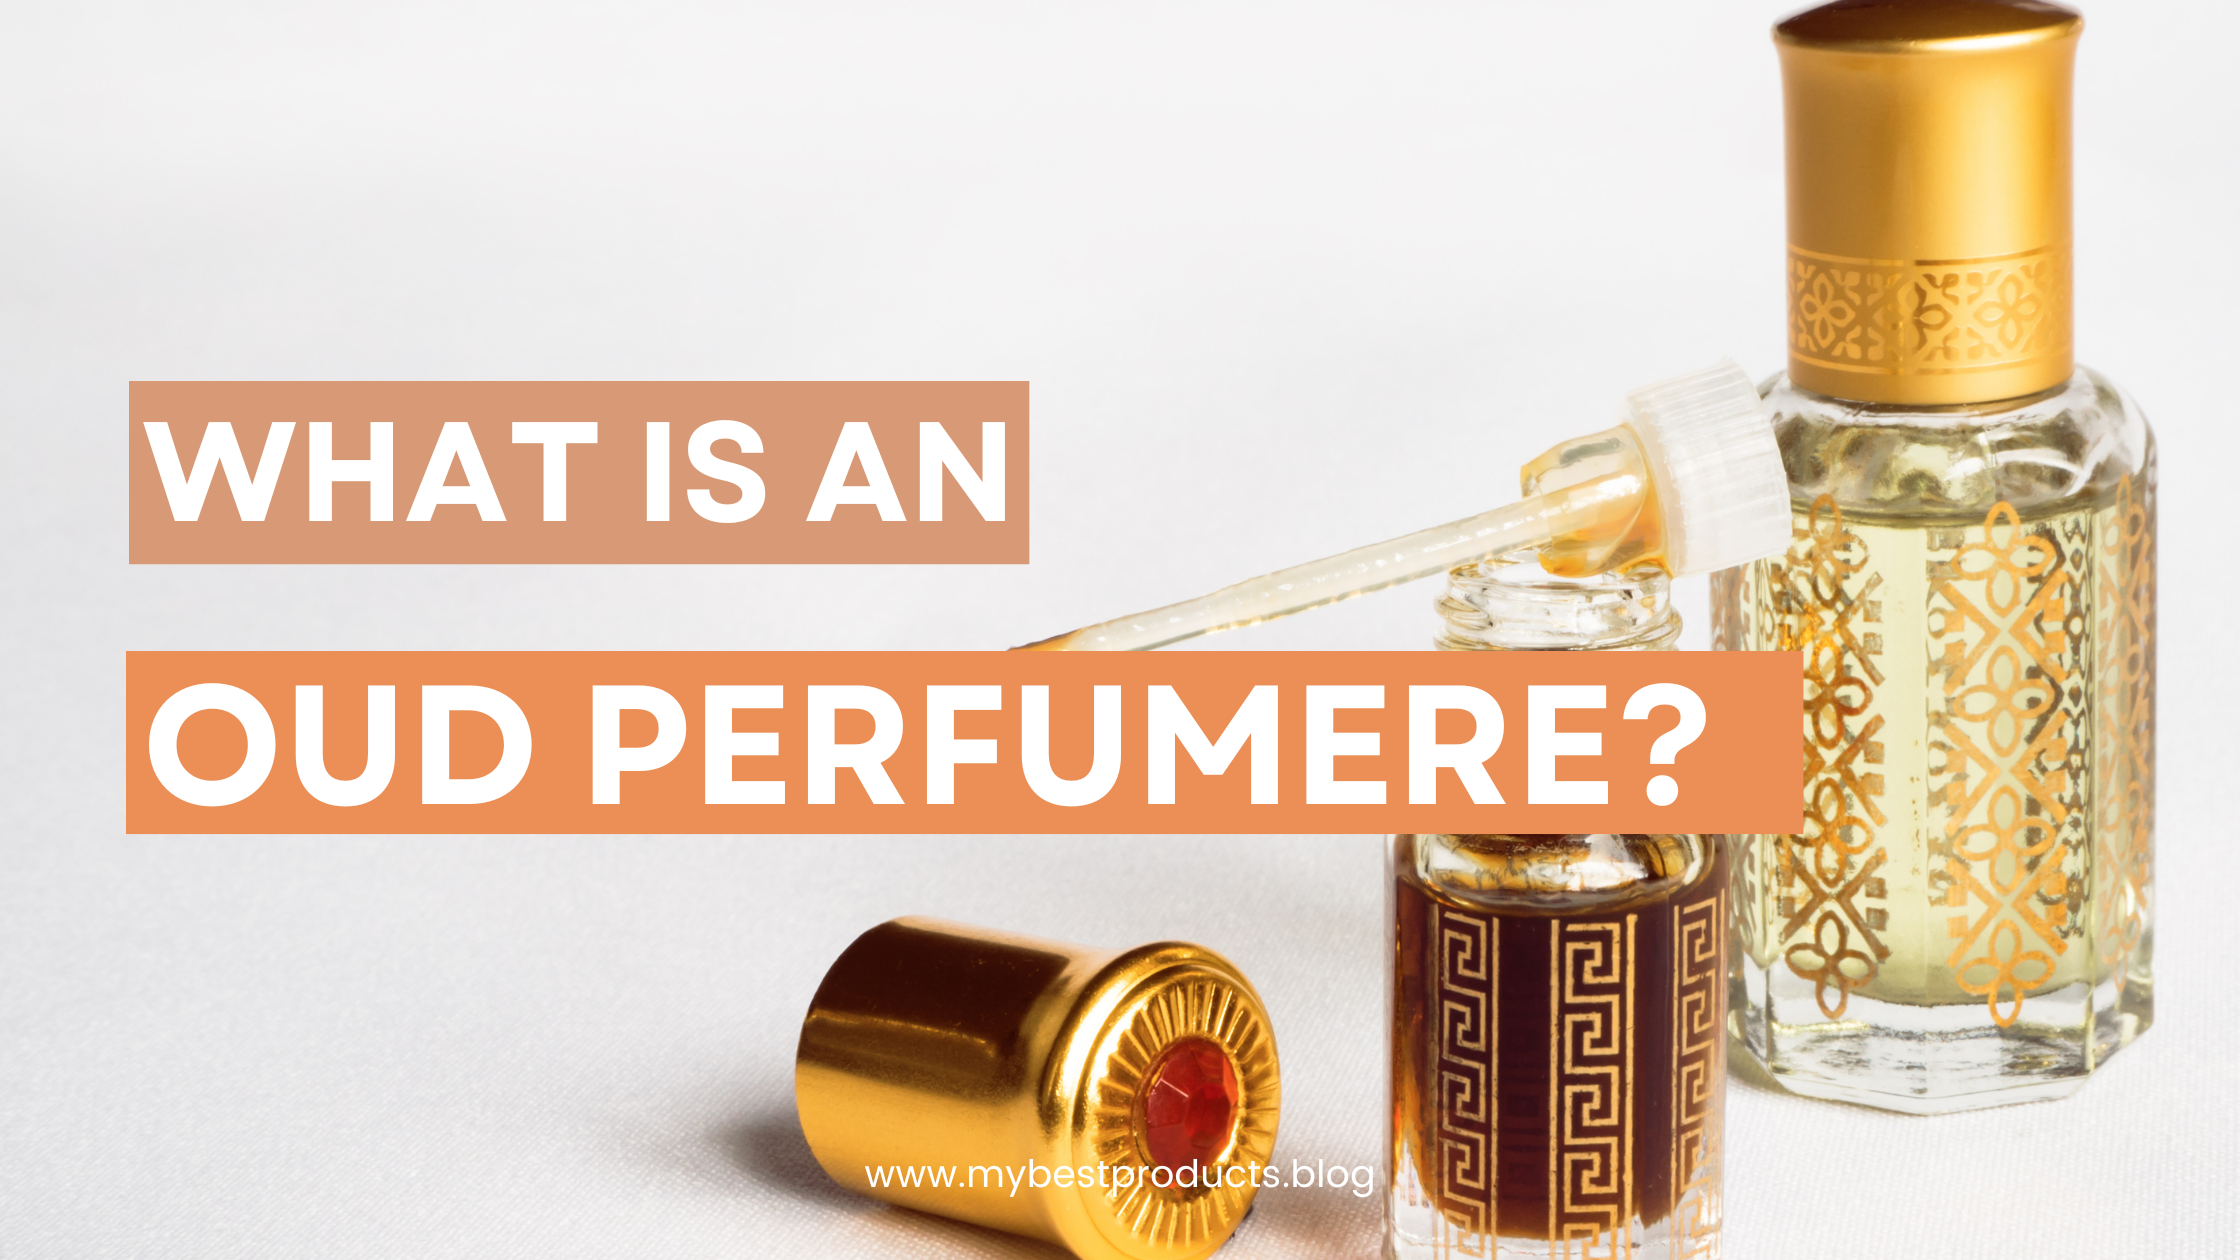 What is an oud perfume?